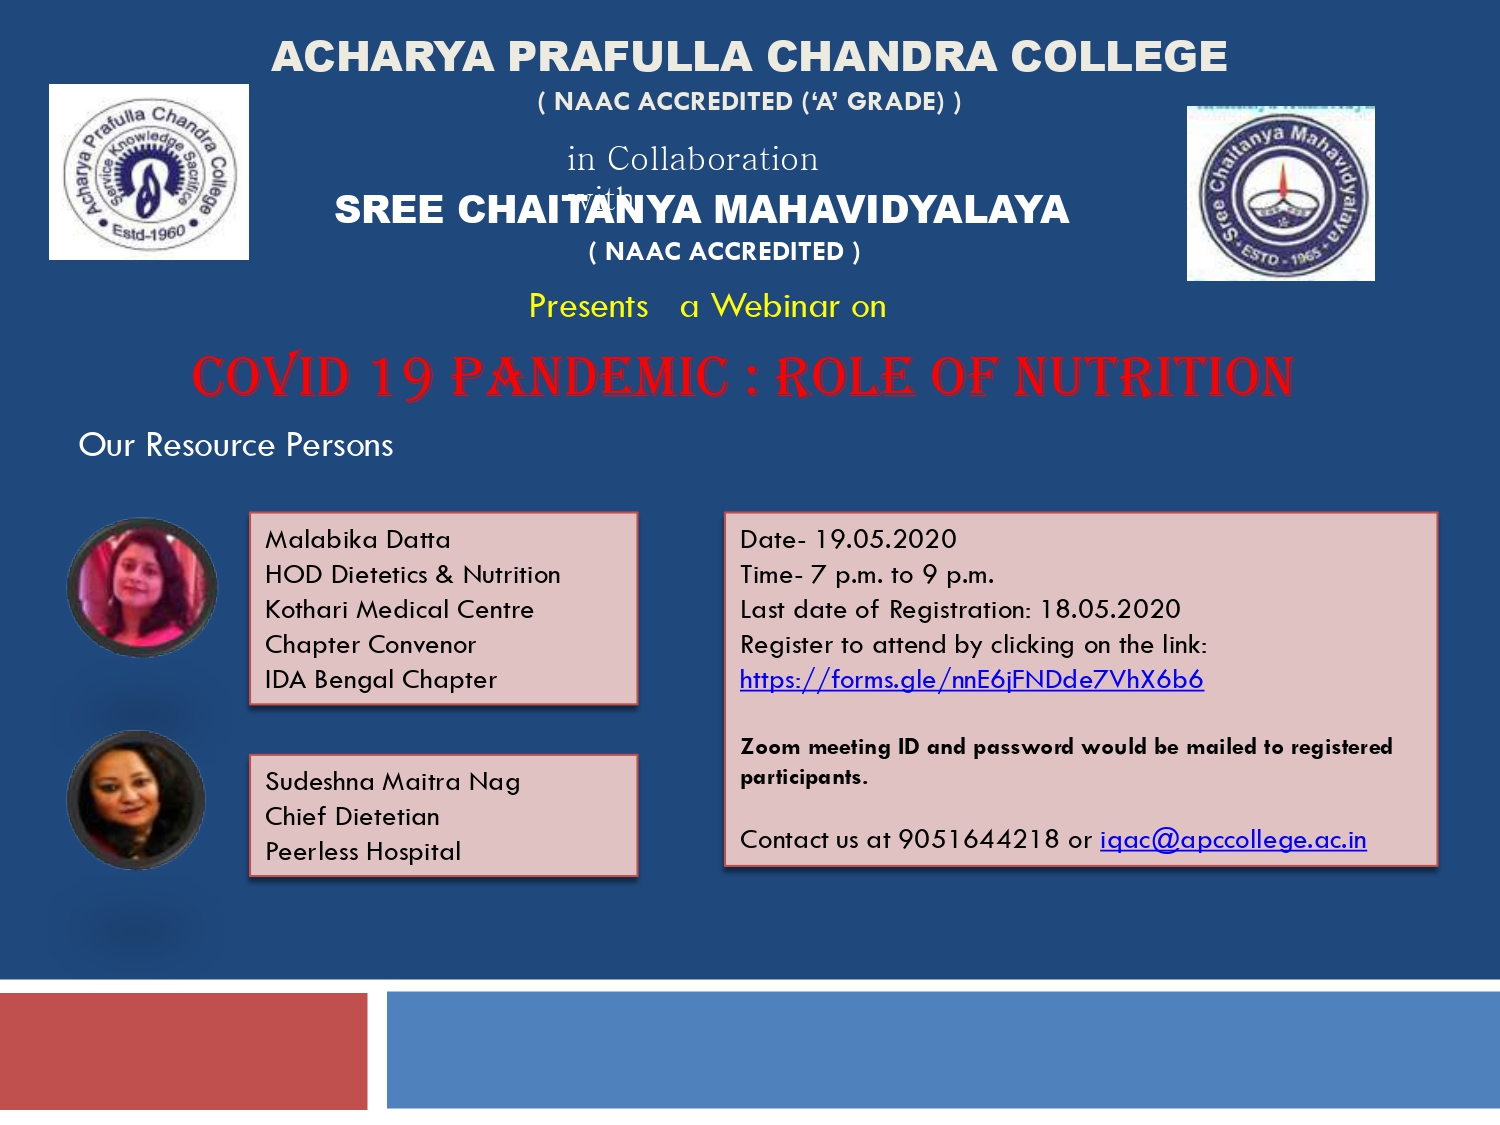 Webinar on Covid-19 Pandemic: Role of Nutrition, Organized By Food and Nutrition, 19-05-2020